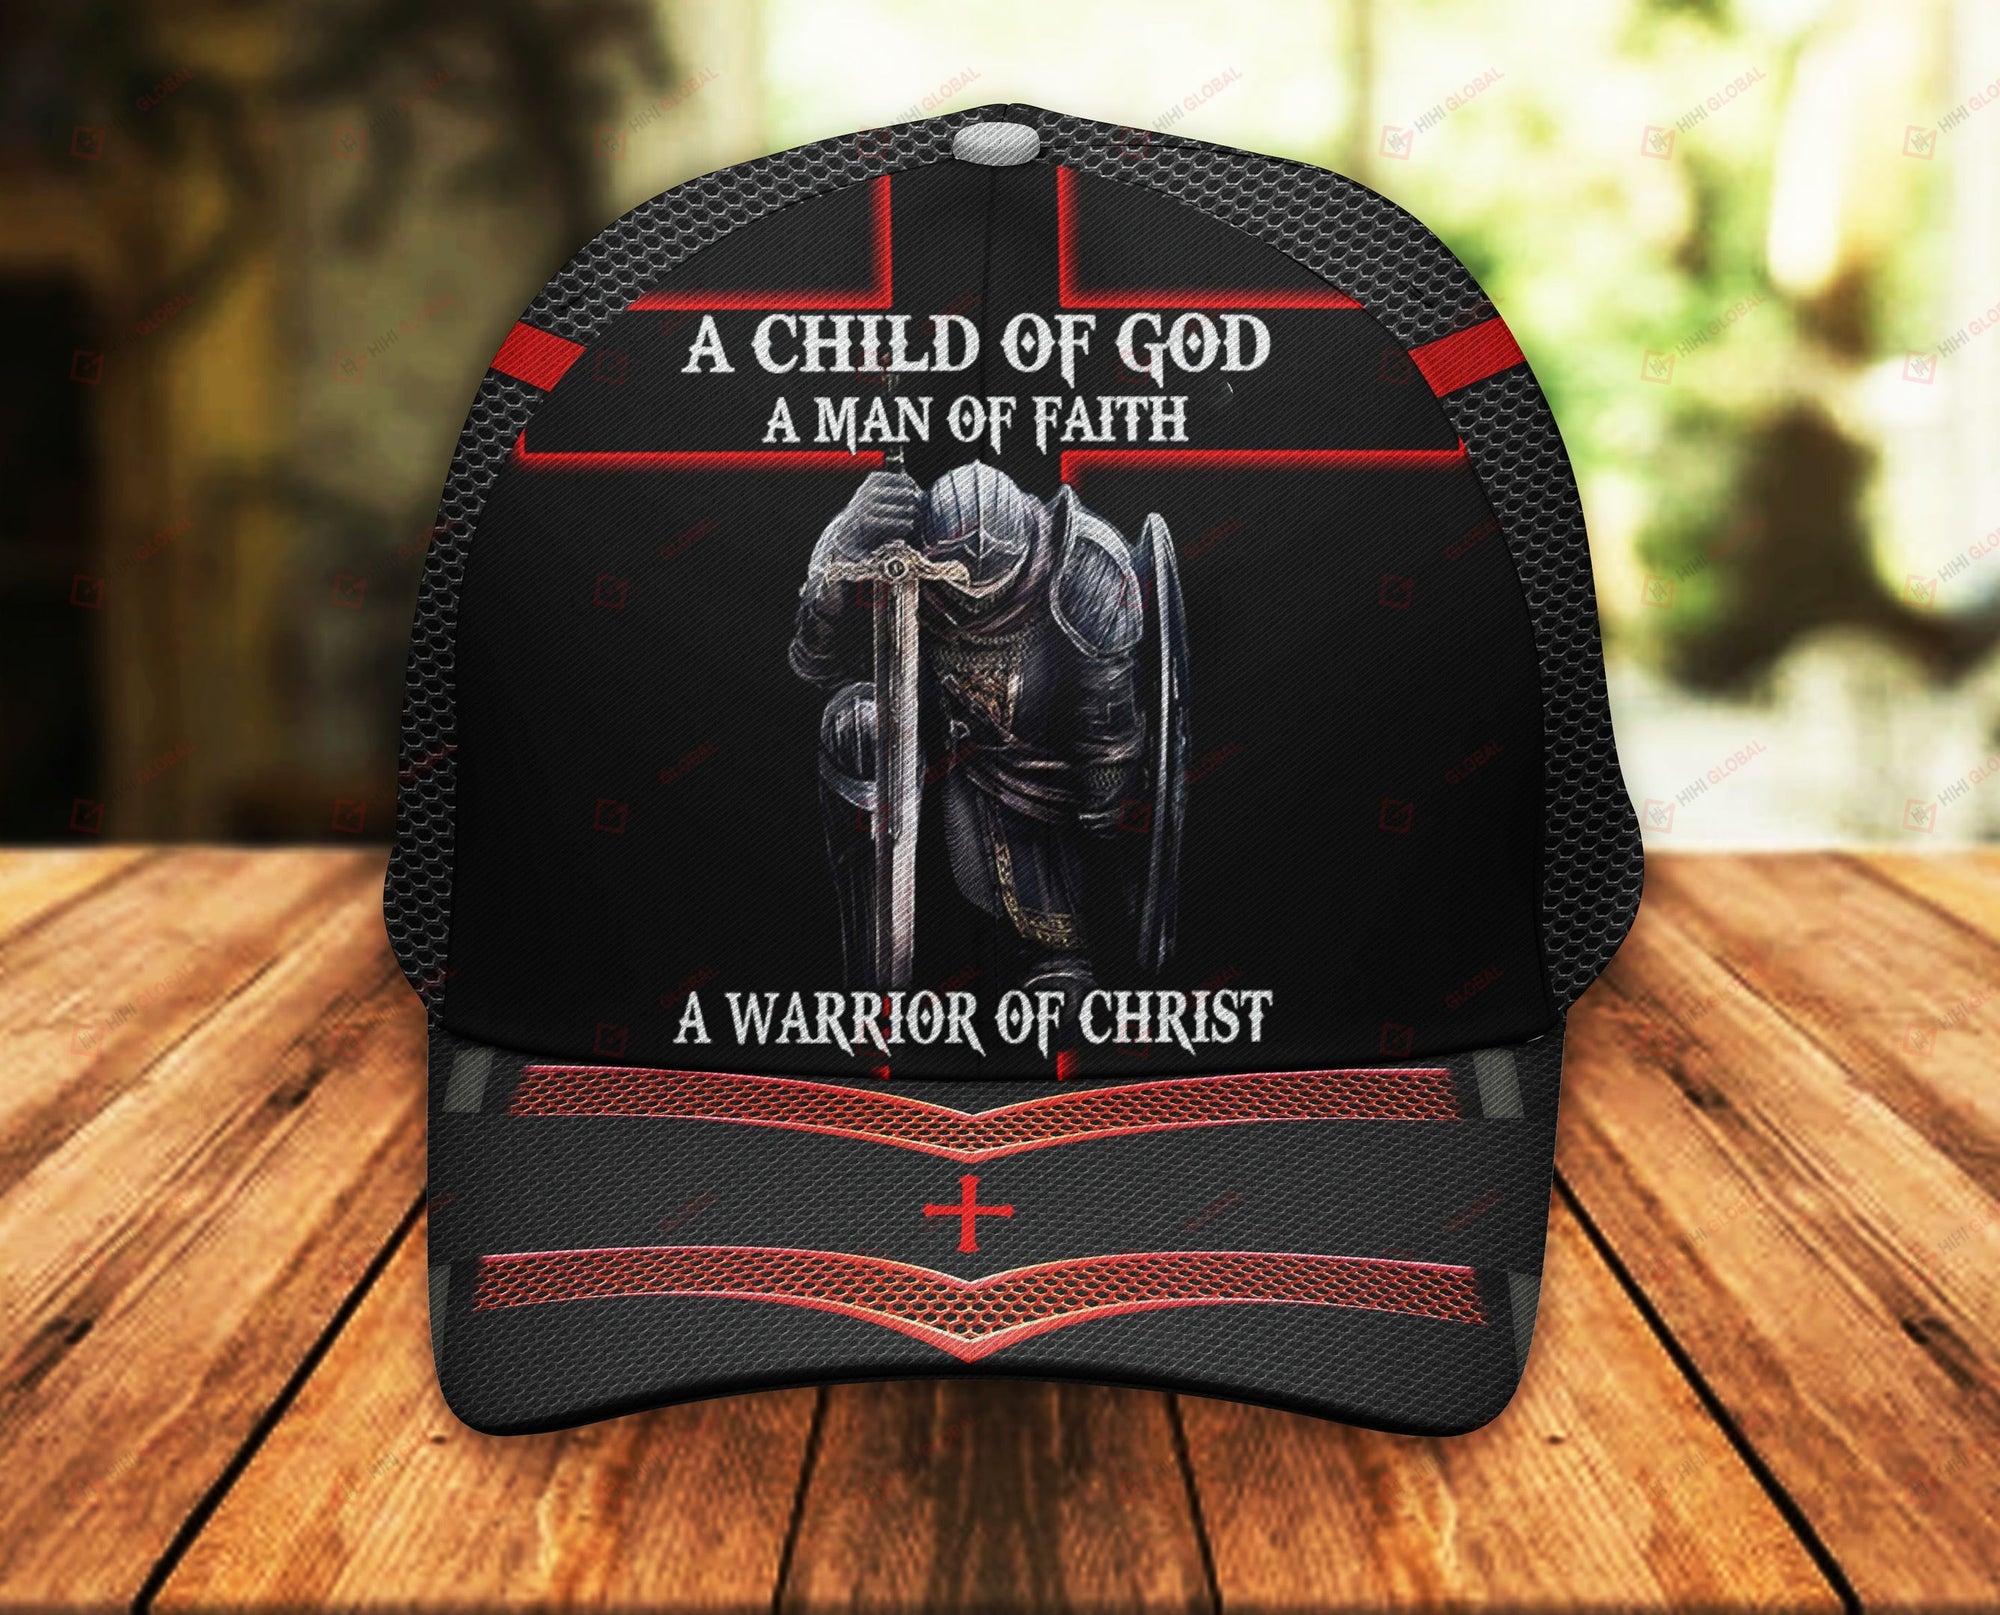 A Child of God A Man of Faith a Warrior of Christ Knight Christian Classic 3d Cap ALL OVER PRINTED